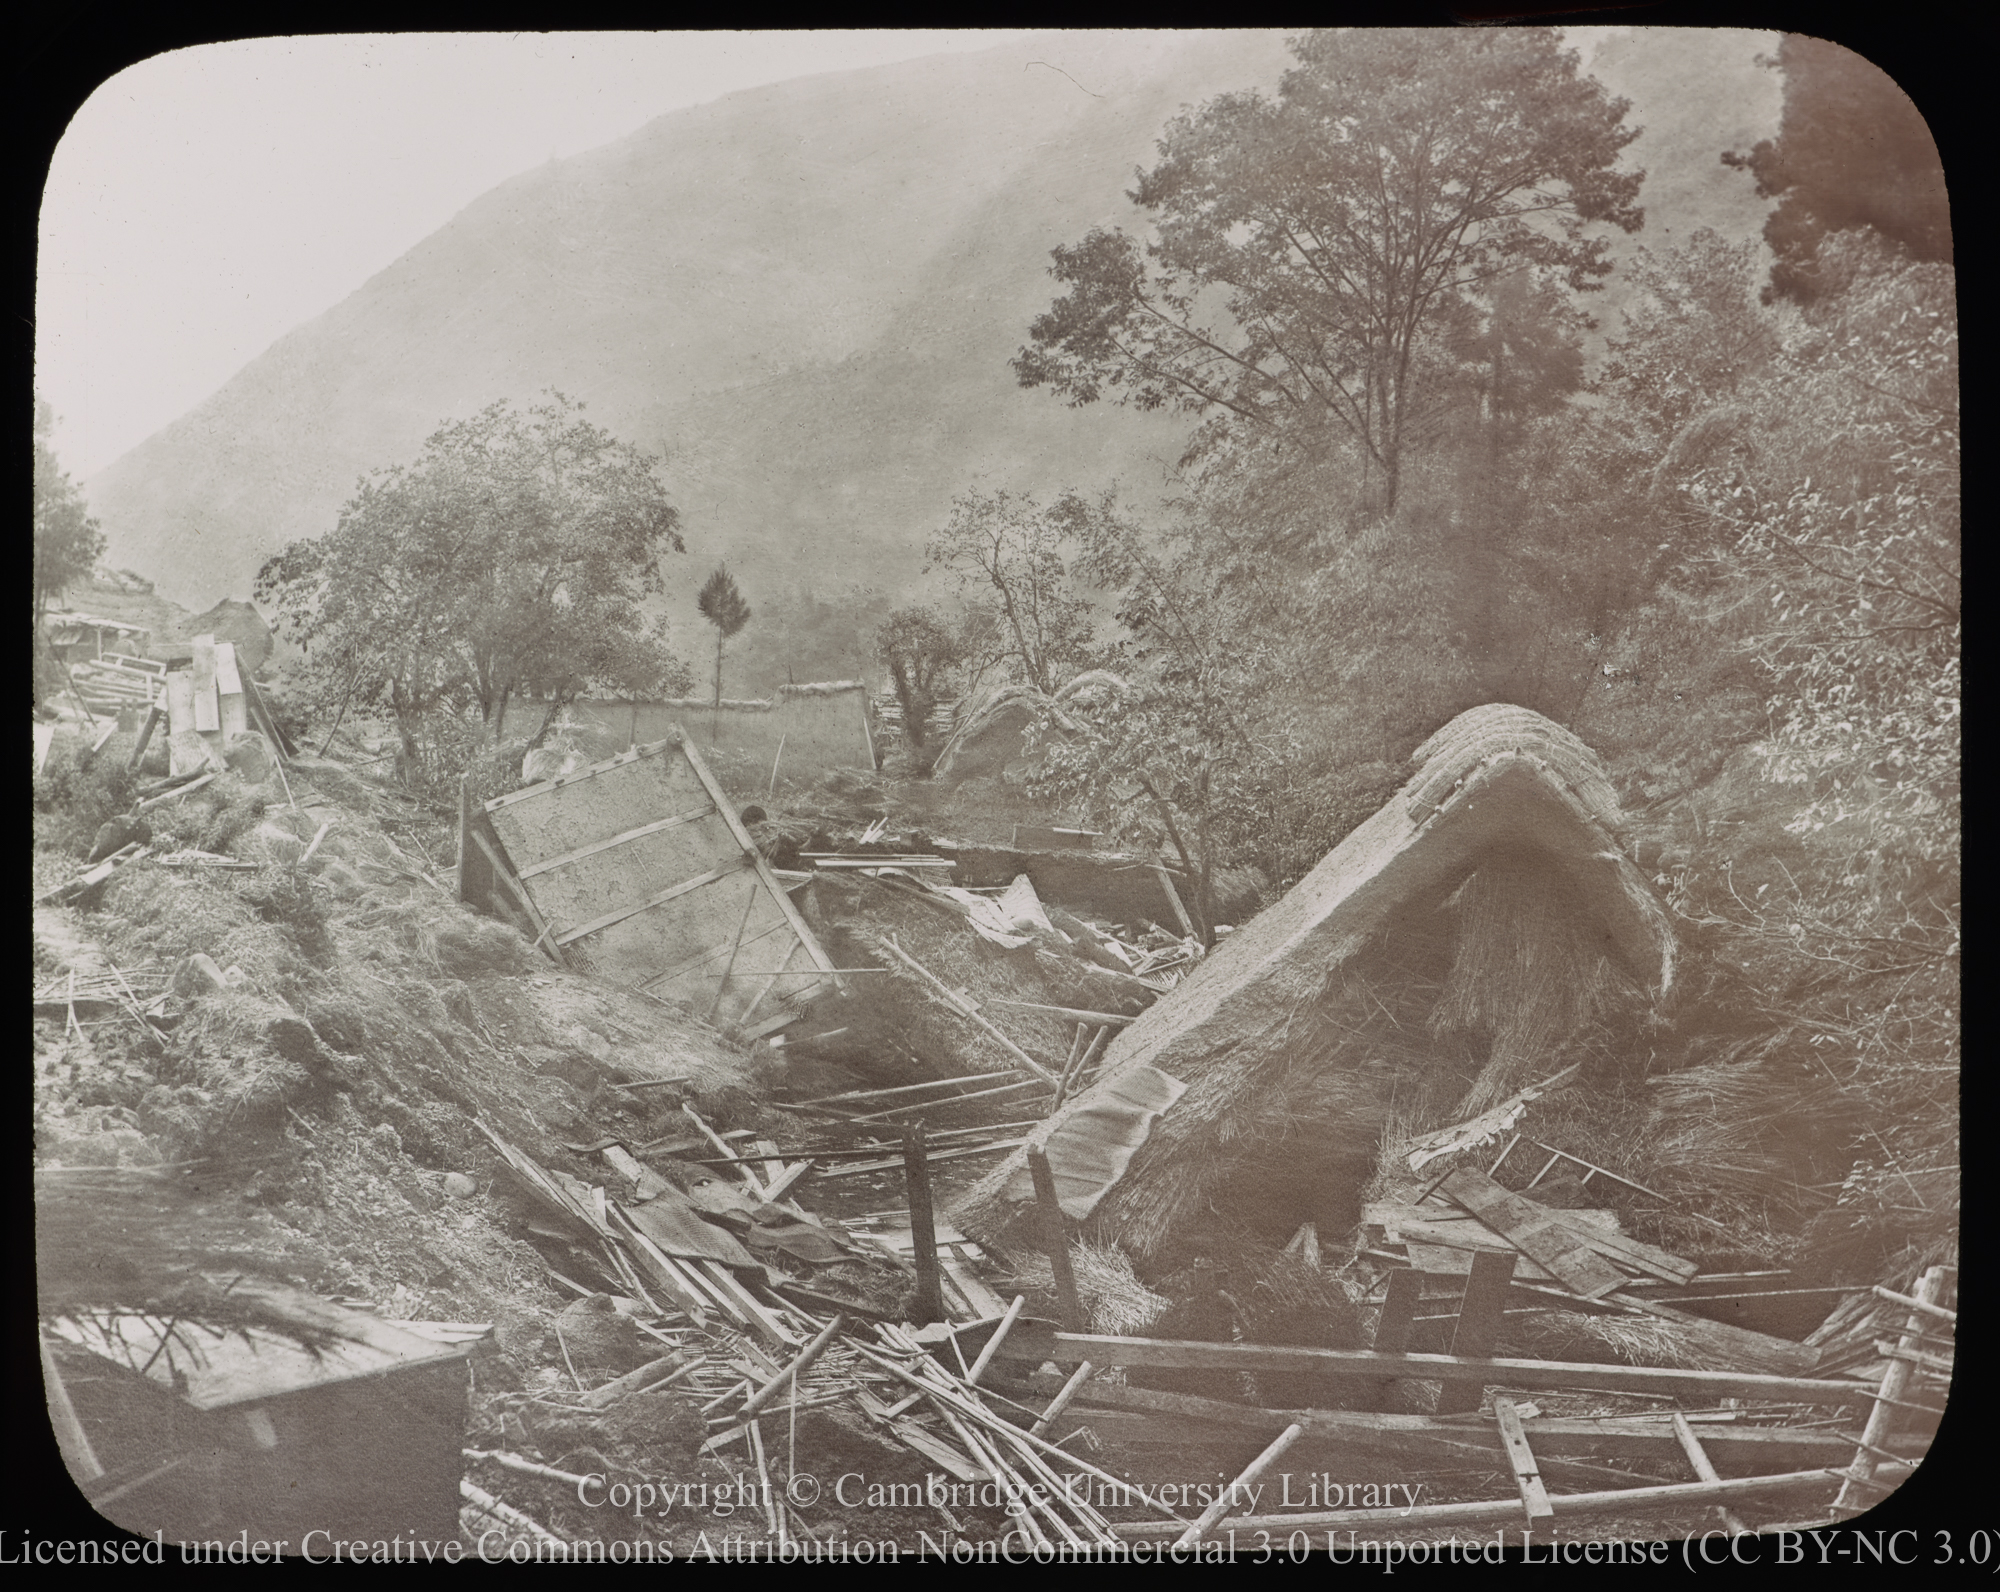 Wreckage in Gifu river valley after 1923 earthquake and typhoon, 1923